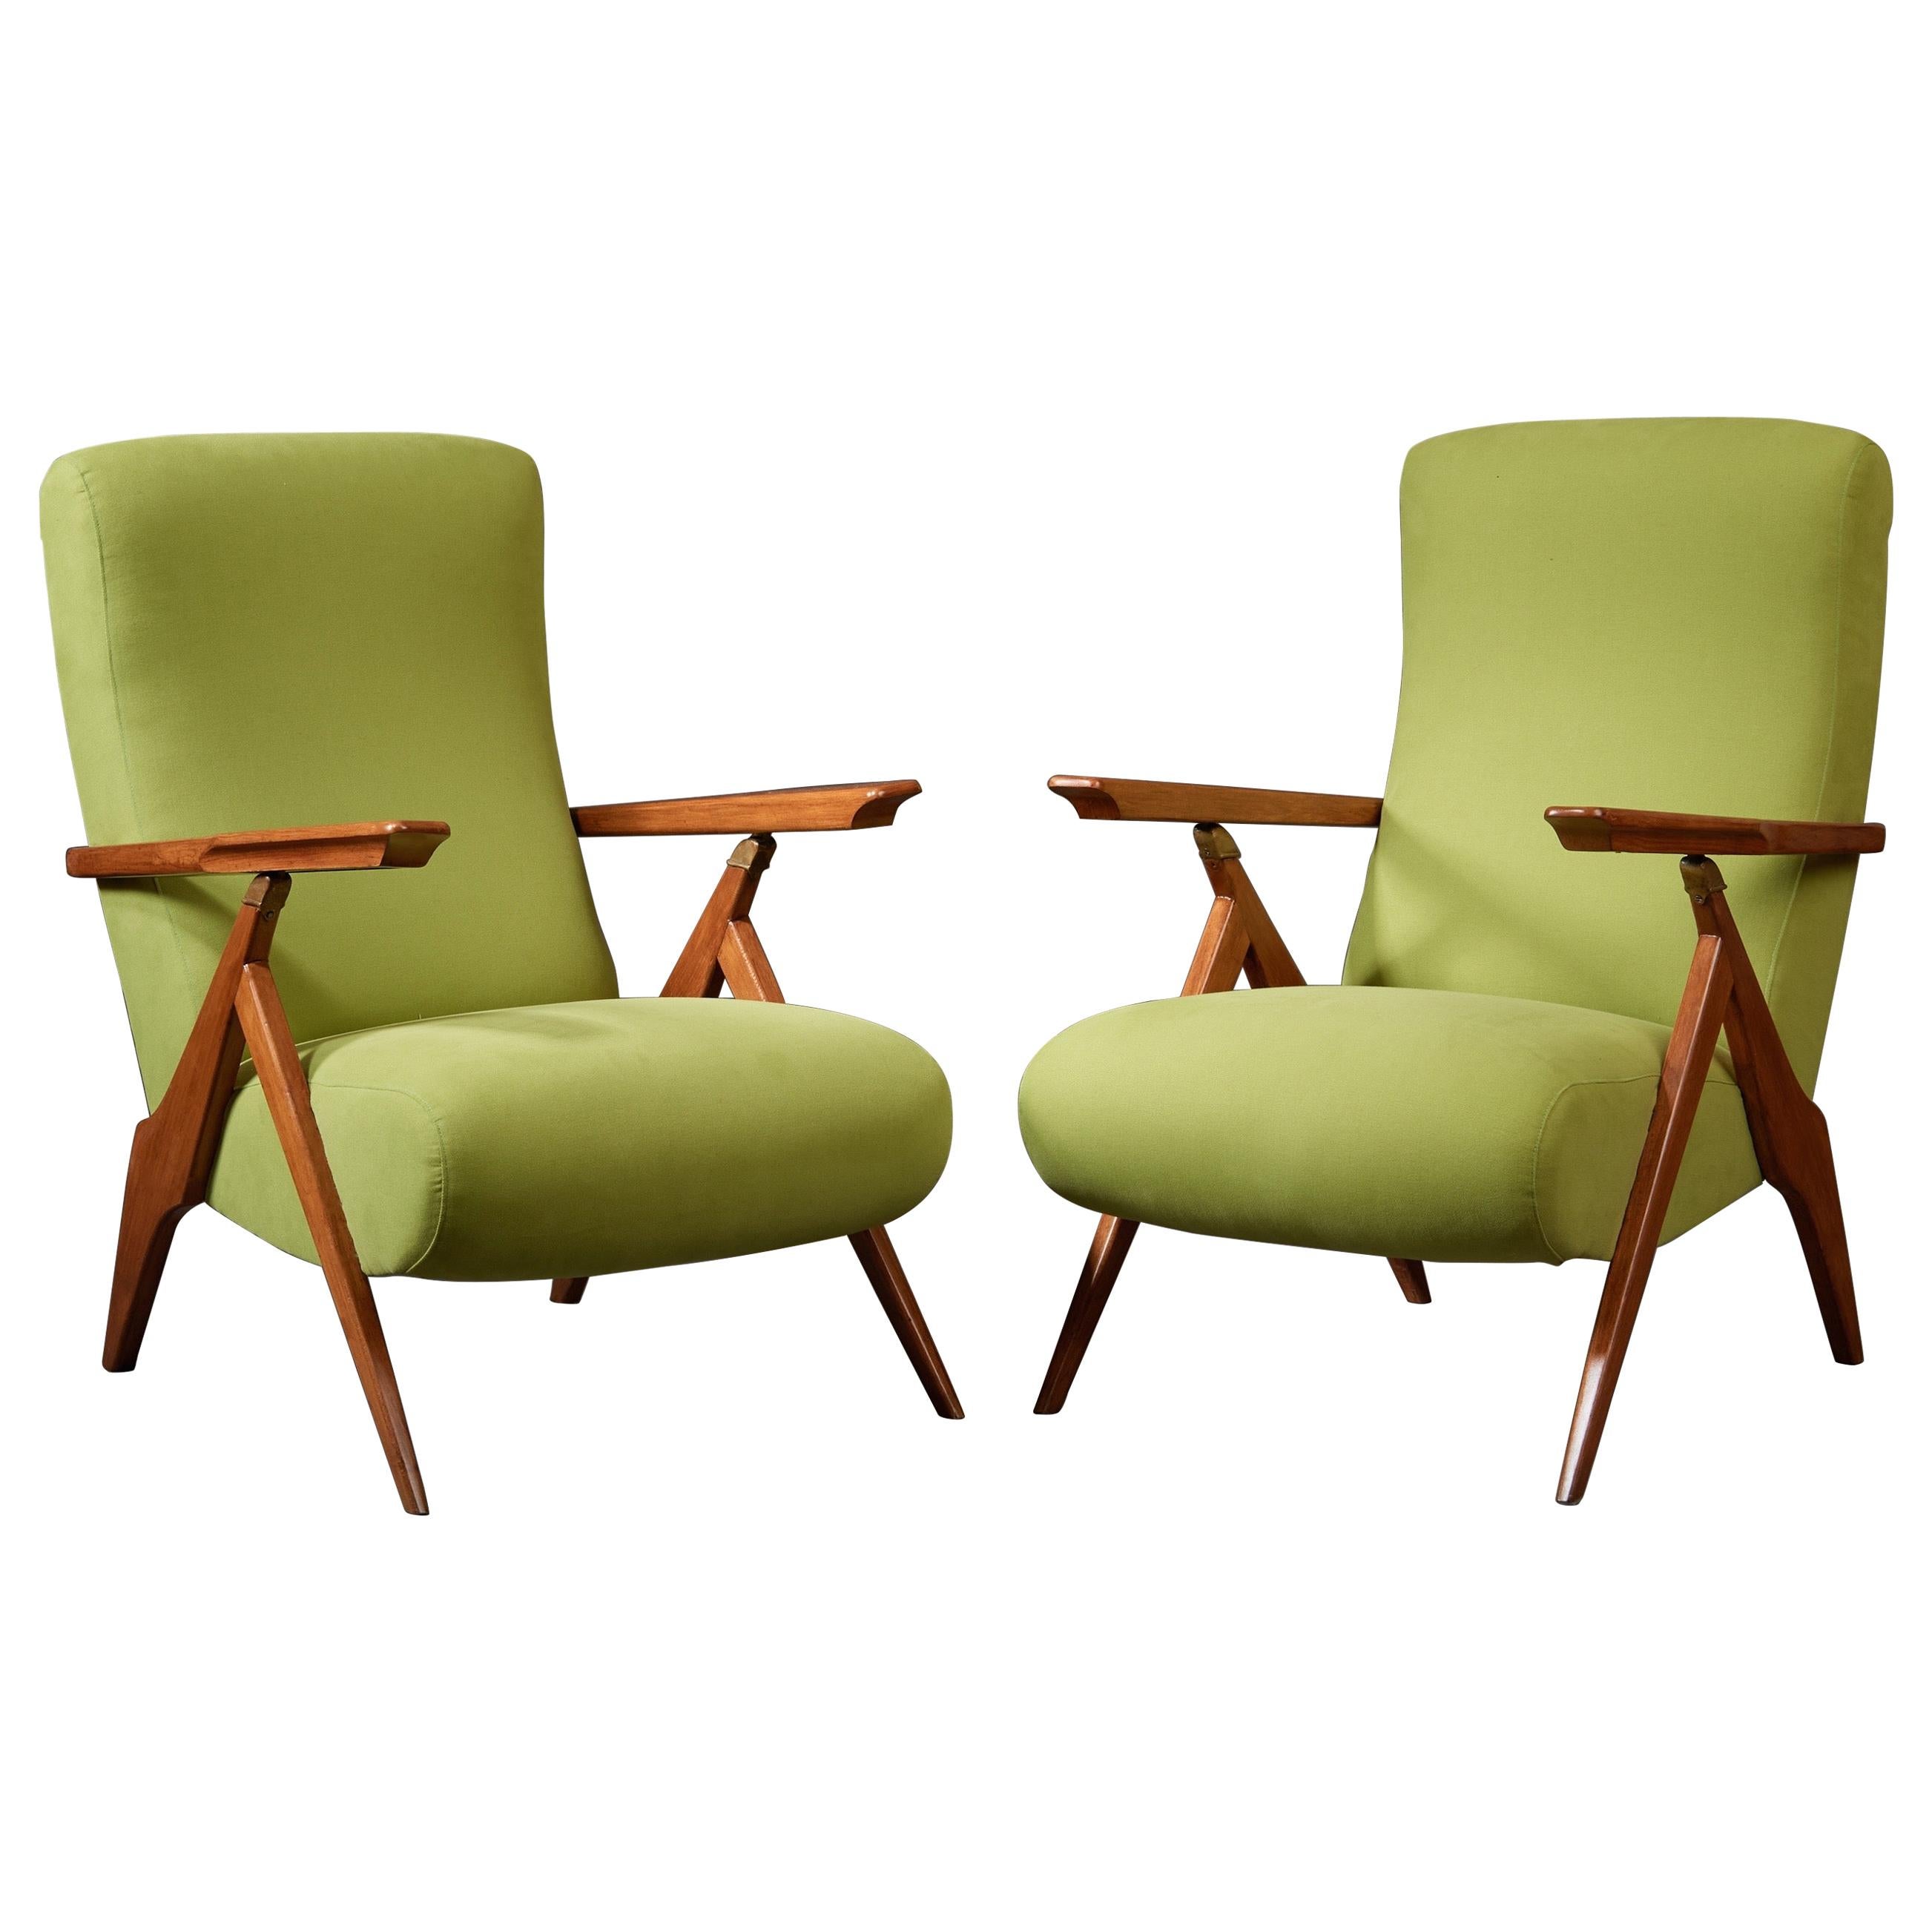 Elegant Pair of Reclining Green Armchairs in Fruitwood and Brass, Italy 1950s